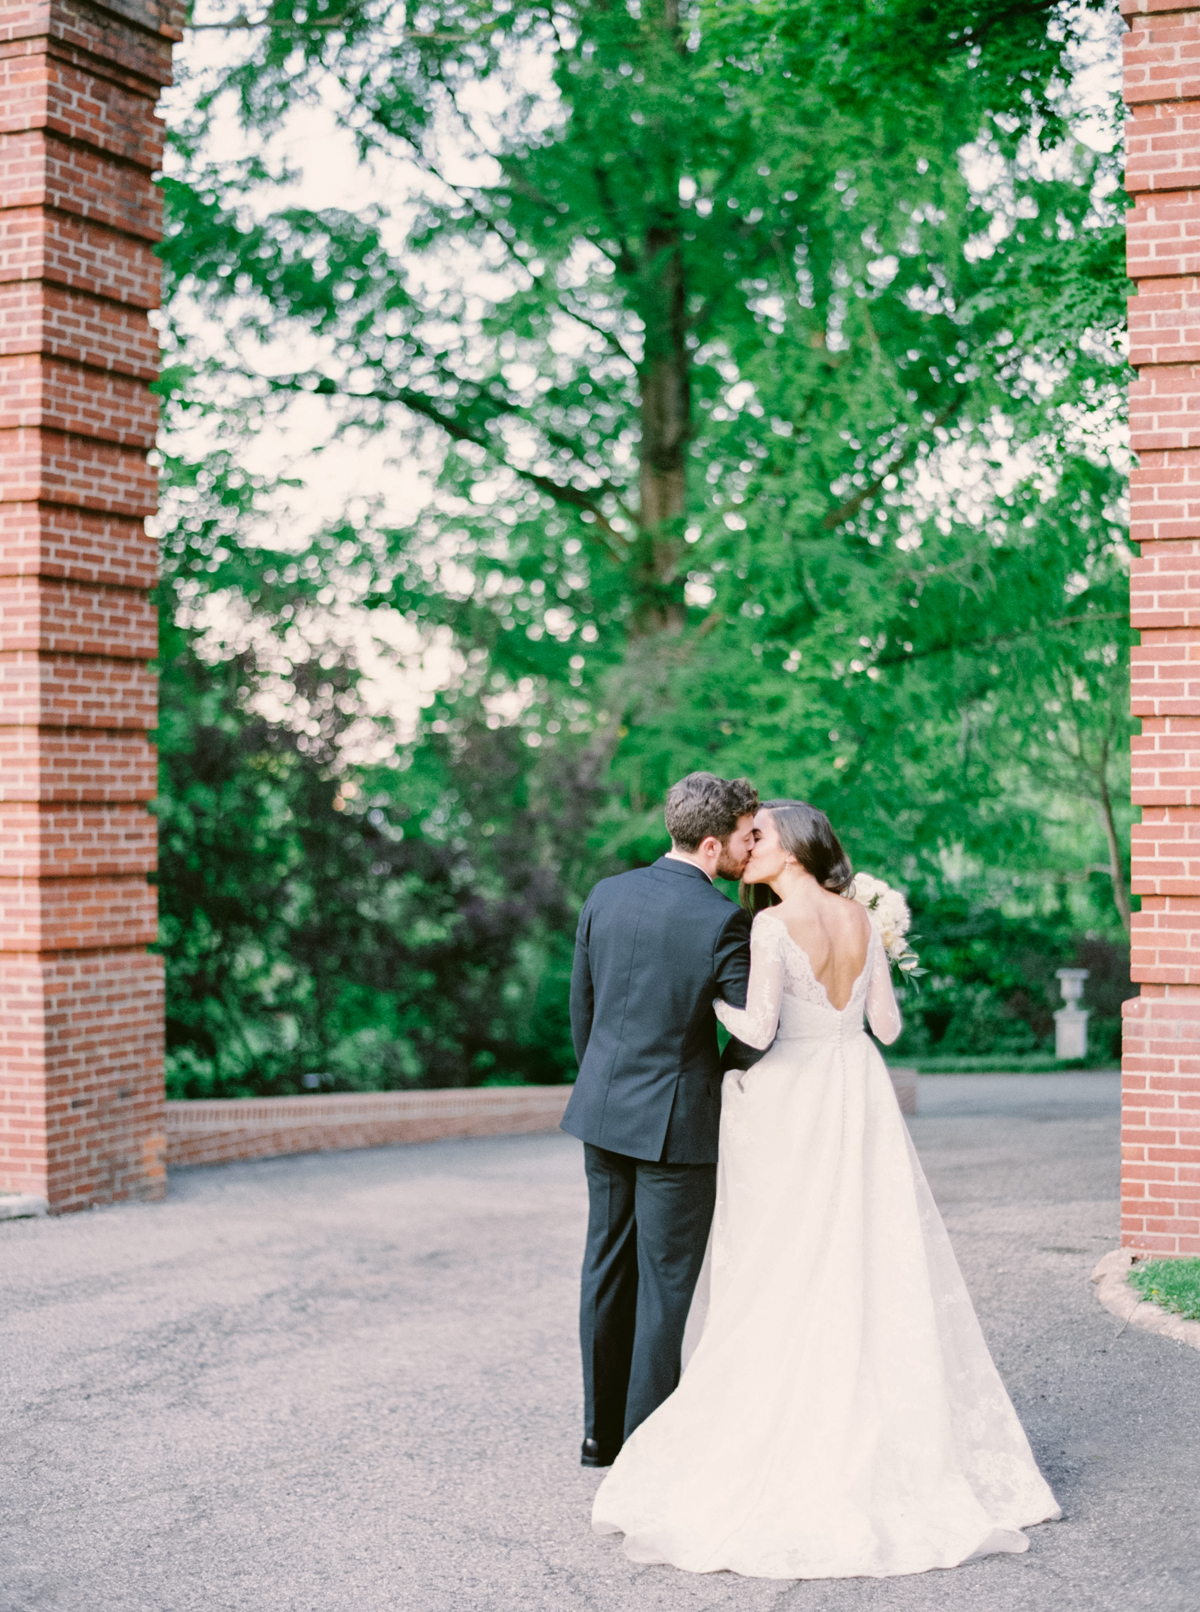 Beautiful Relationships Start as Buds and then Bloom: Madison and Michael's Elegant Estate Wedding as Featured in The Pioneer Issue